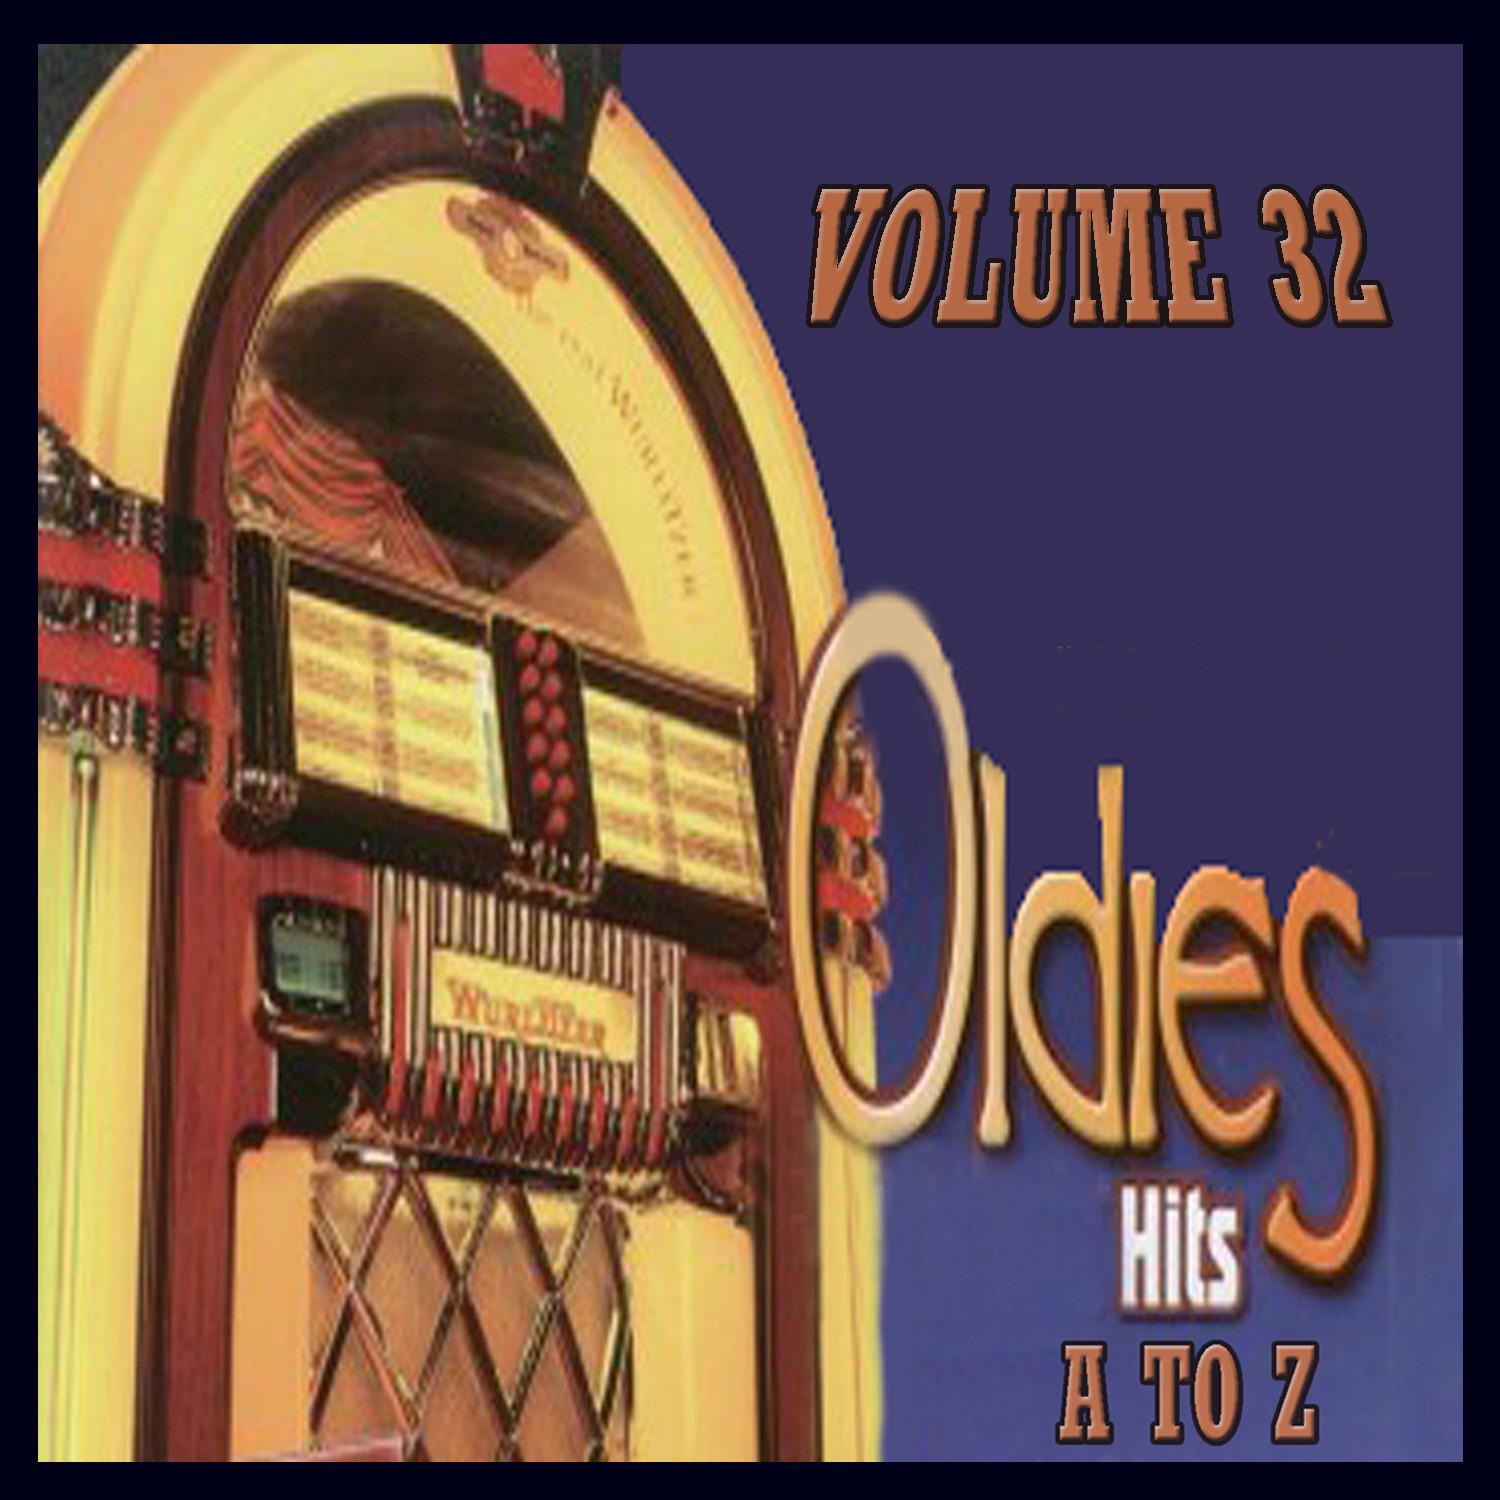 Oldies Hits A to Z, Vol. 32